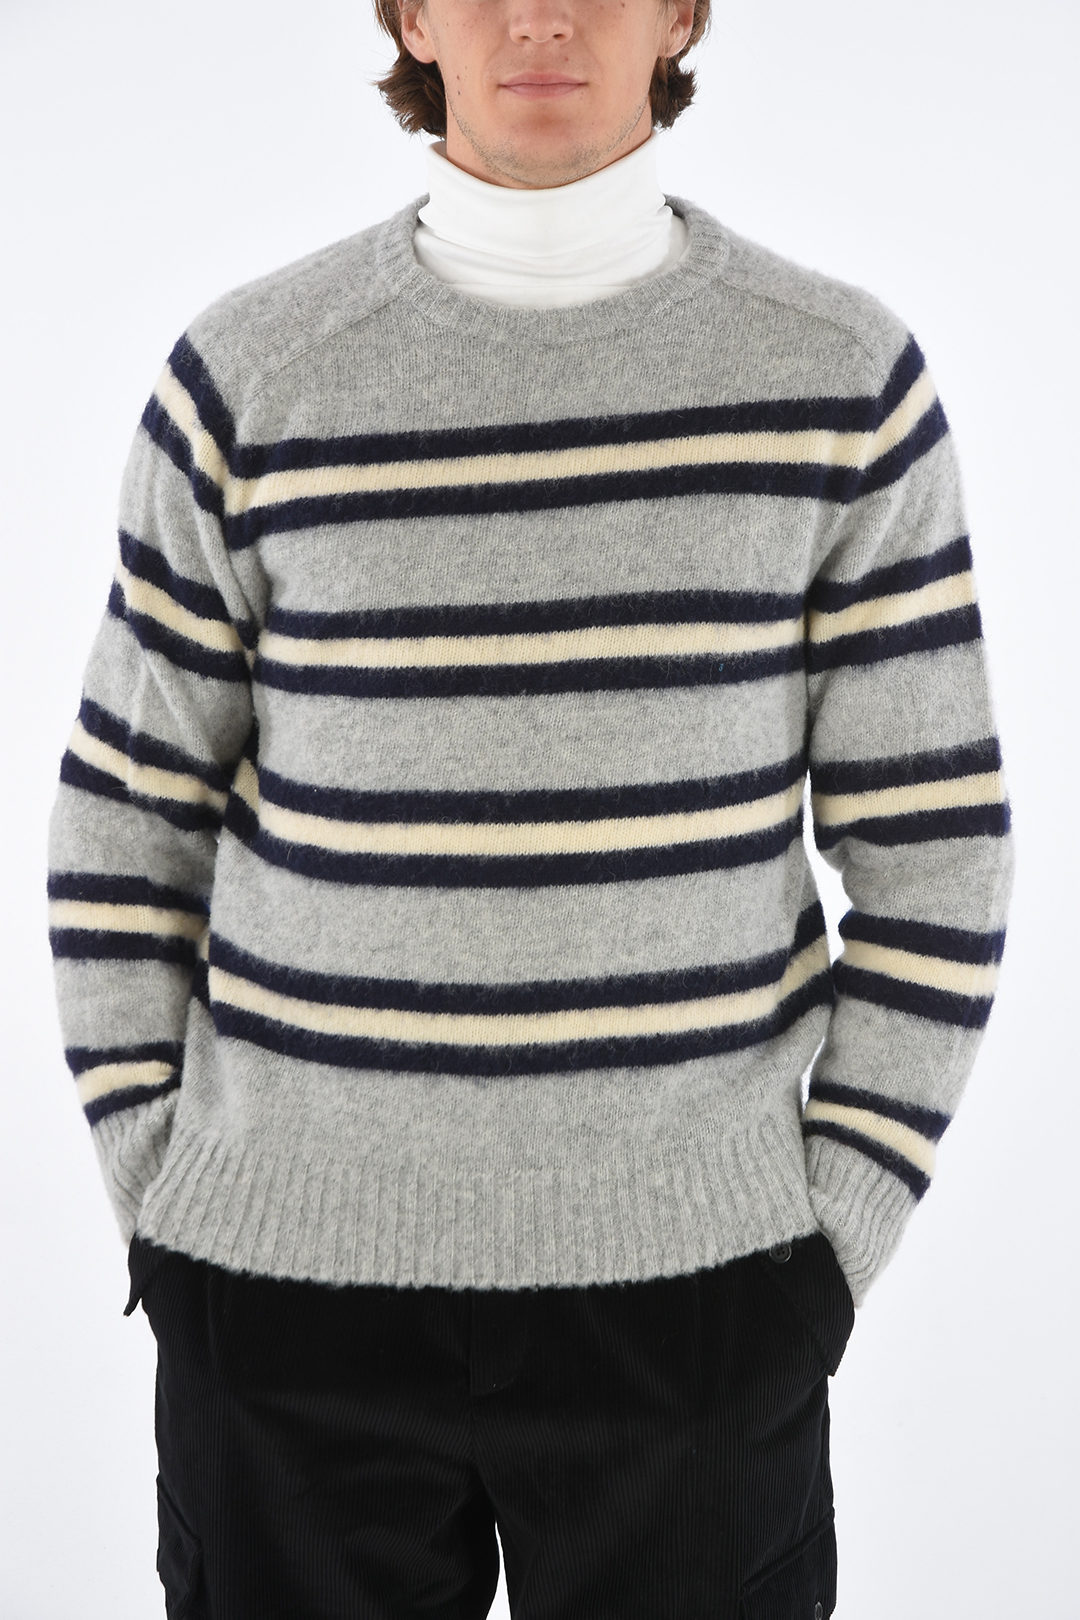 Howlin striped crew-neck sweater men - Glamood Outlet